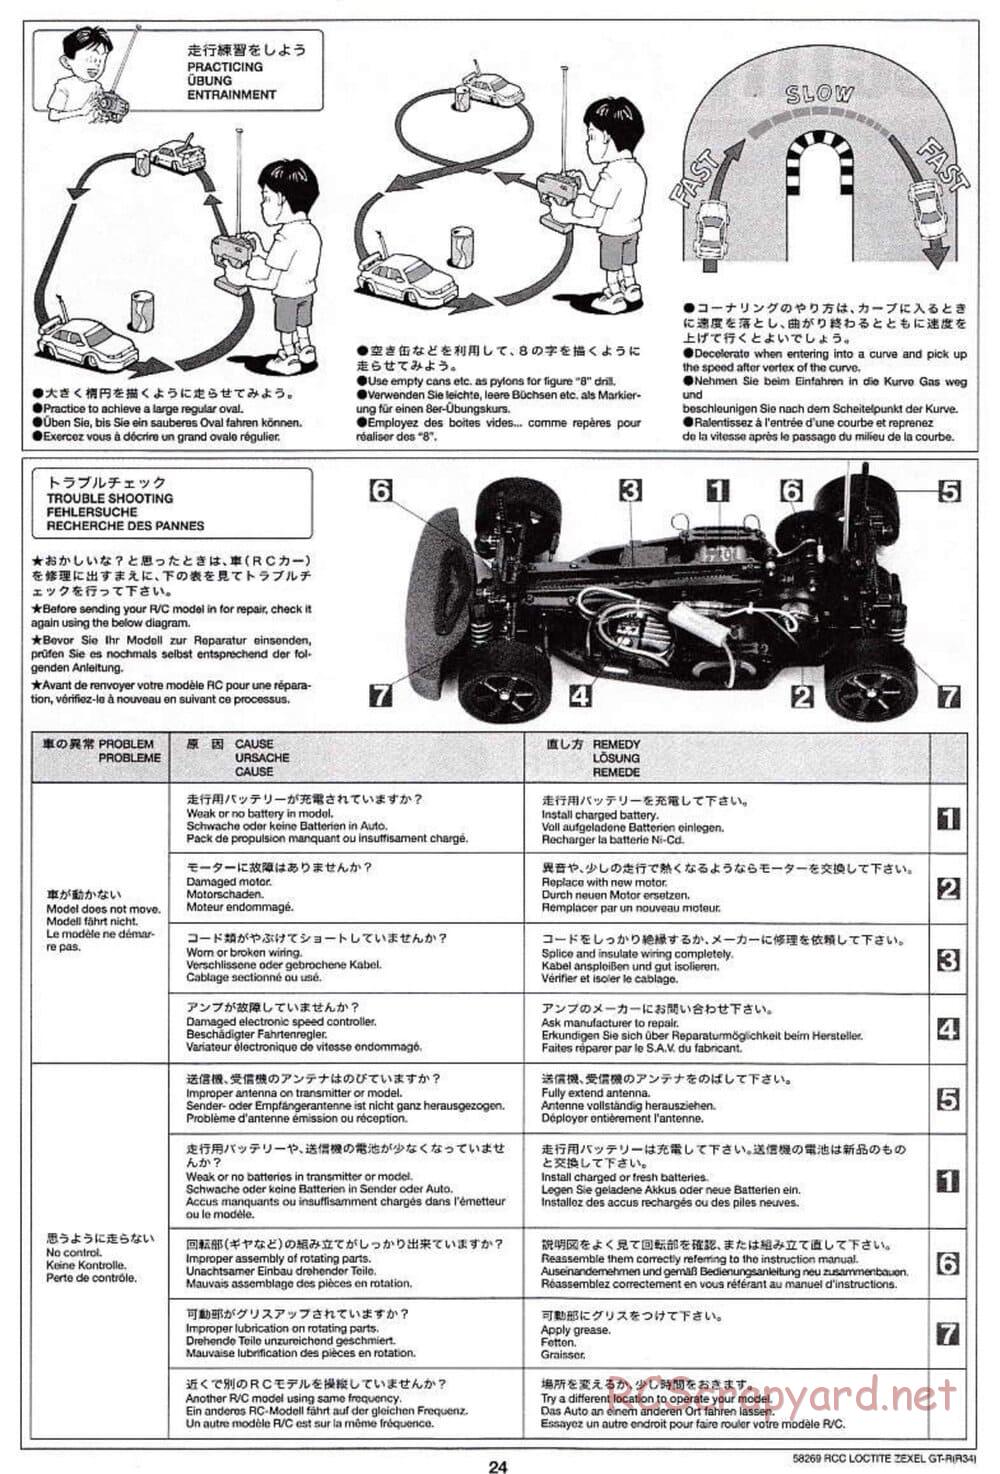 Tamiya - Loctite Zexel Skyline GT-R (R34) - TA-04 Chassis - Manual - Page 24